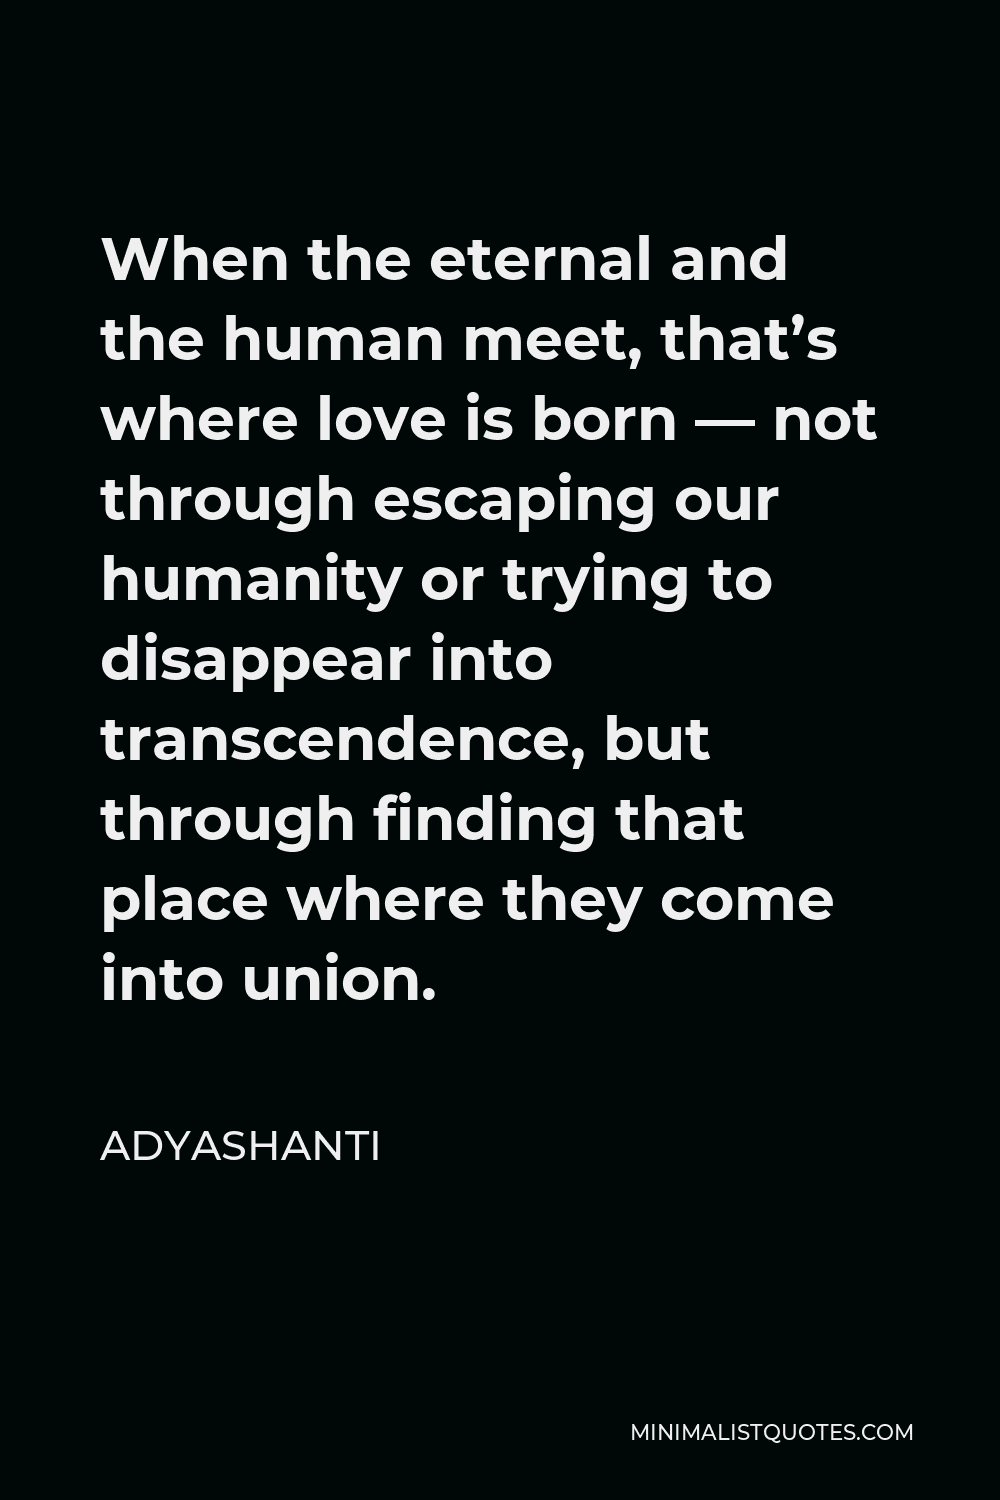 Adyashanti Quote - When the eternal and the human meet, that’s where love is born — not through escaping our humanity or trying to disappear into transcendence, but through finding that place where they come into union.